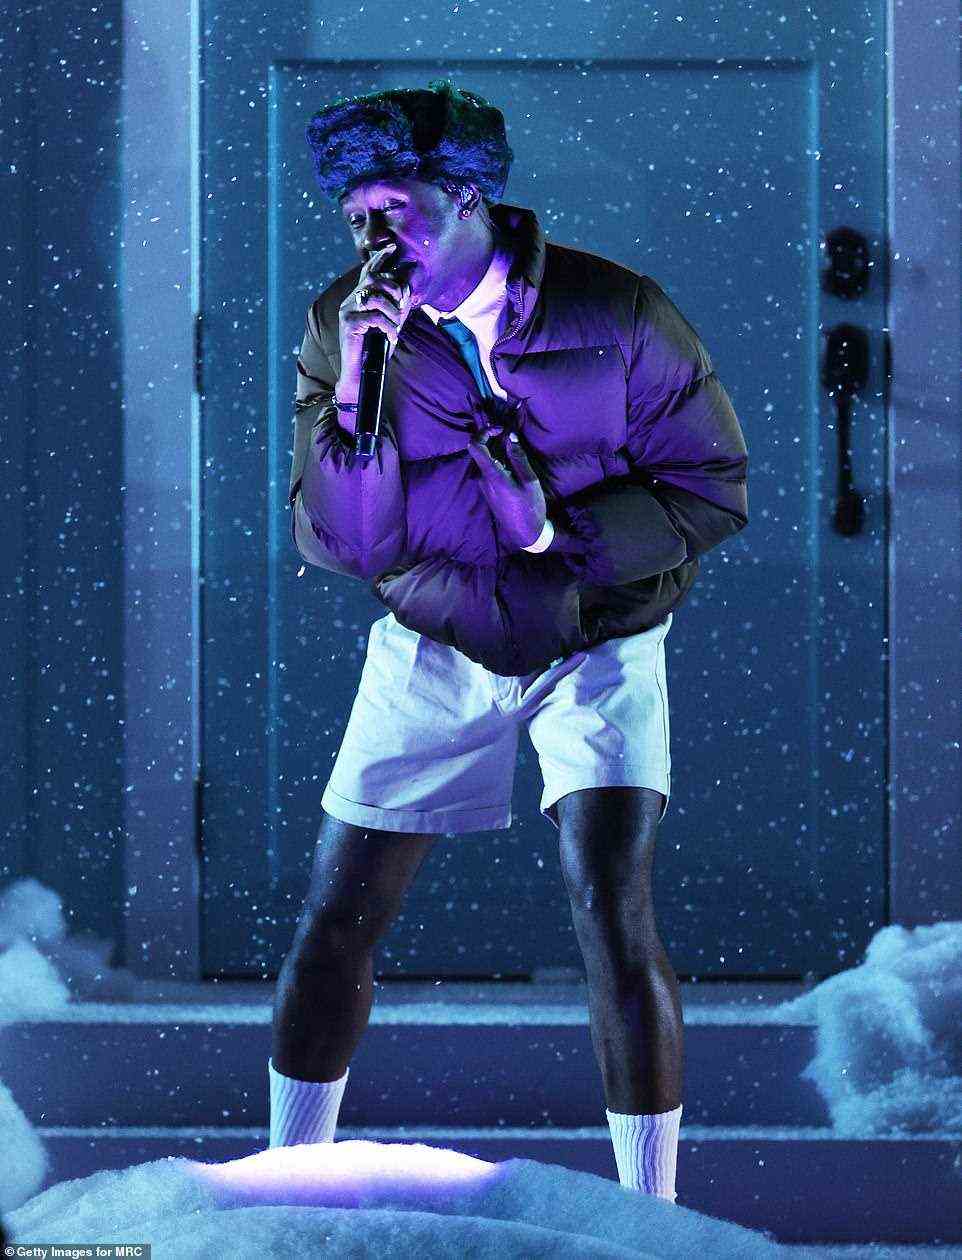 Creative: Tyler, The Creator performed his song Massa around a snowy stage set